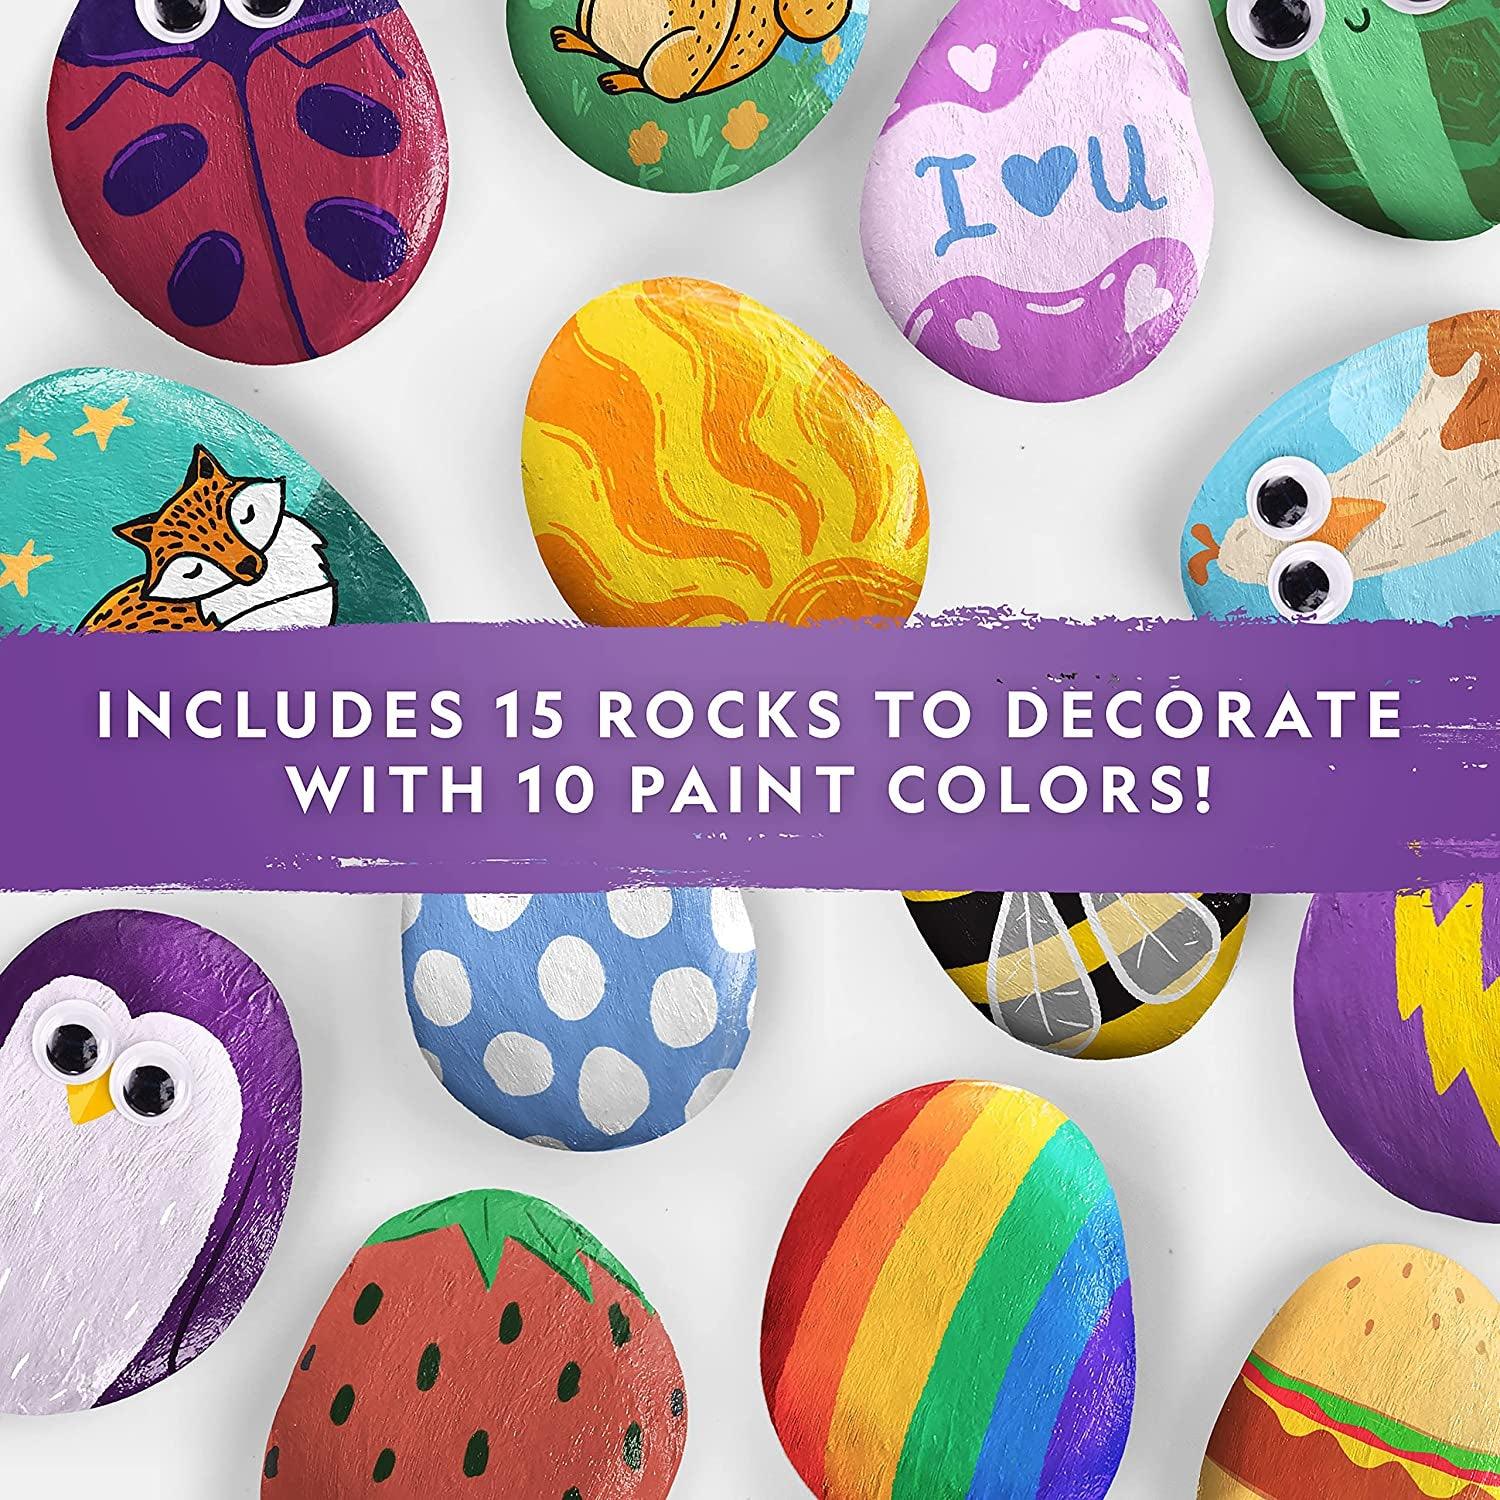 NATIONAL GEOGRAPHIC Rock Painting Kit - Arts and Crafts Kit for Kids, Paint & Decorate 15 River Rocks - WoodArtSupply